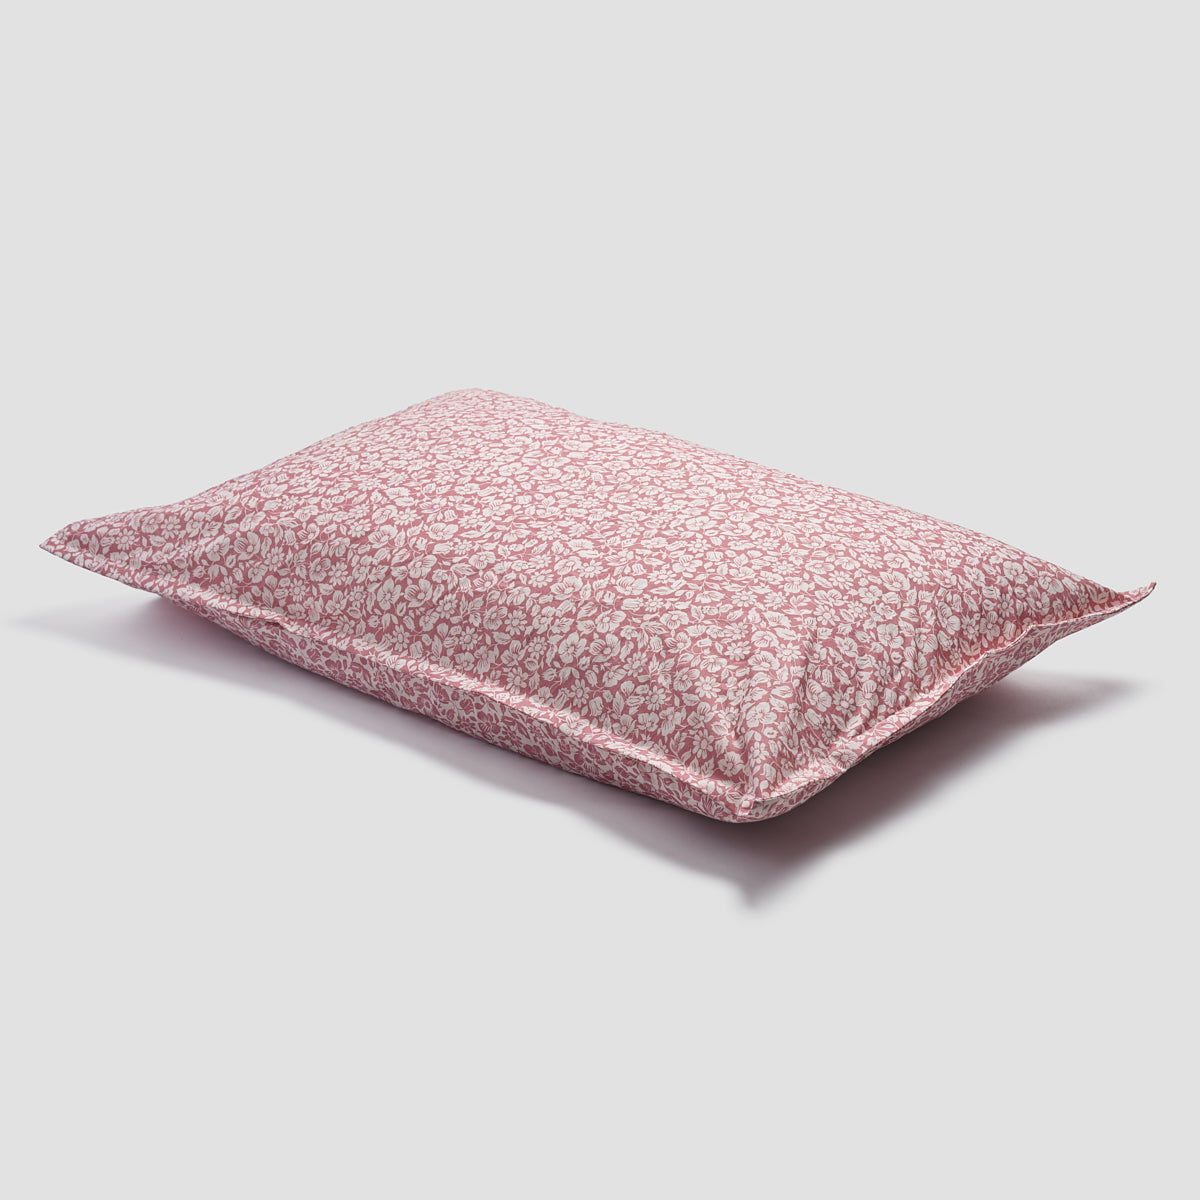 Red Dune Meadow Floral Printed Cotton Pillowcase